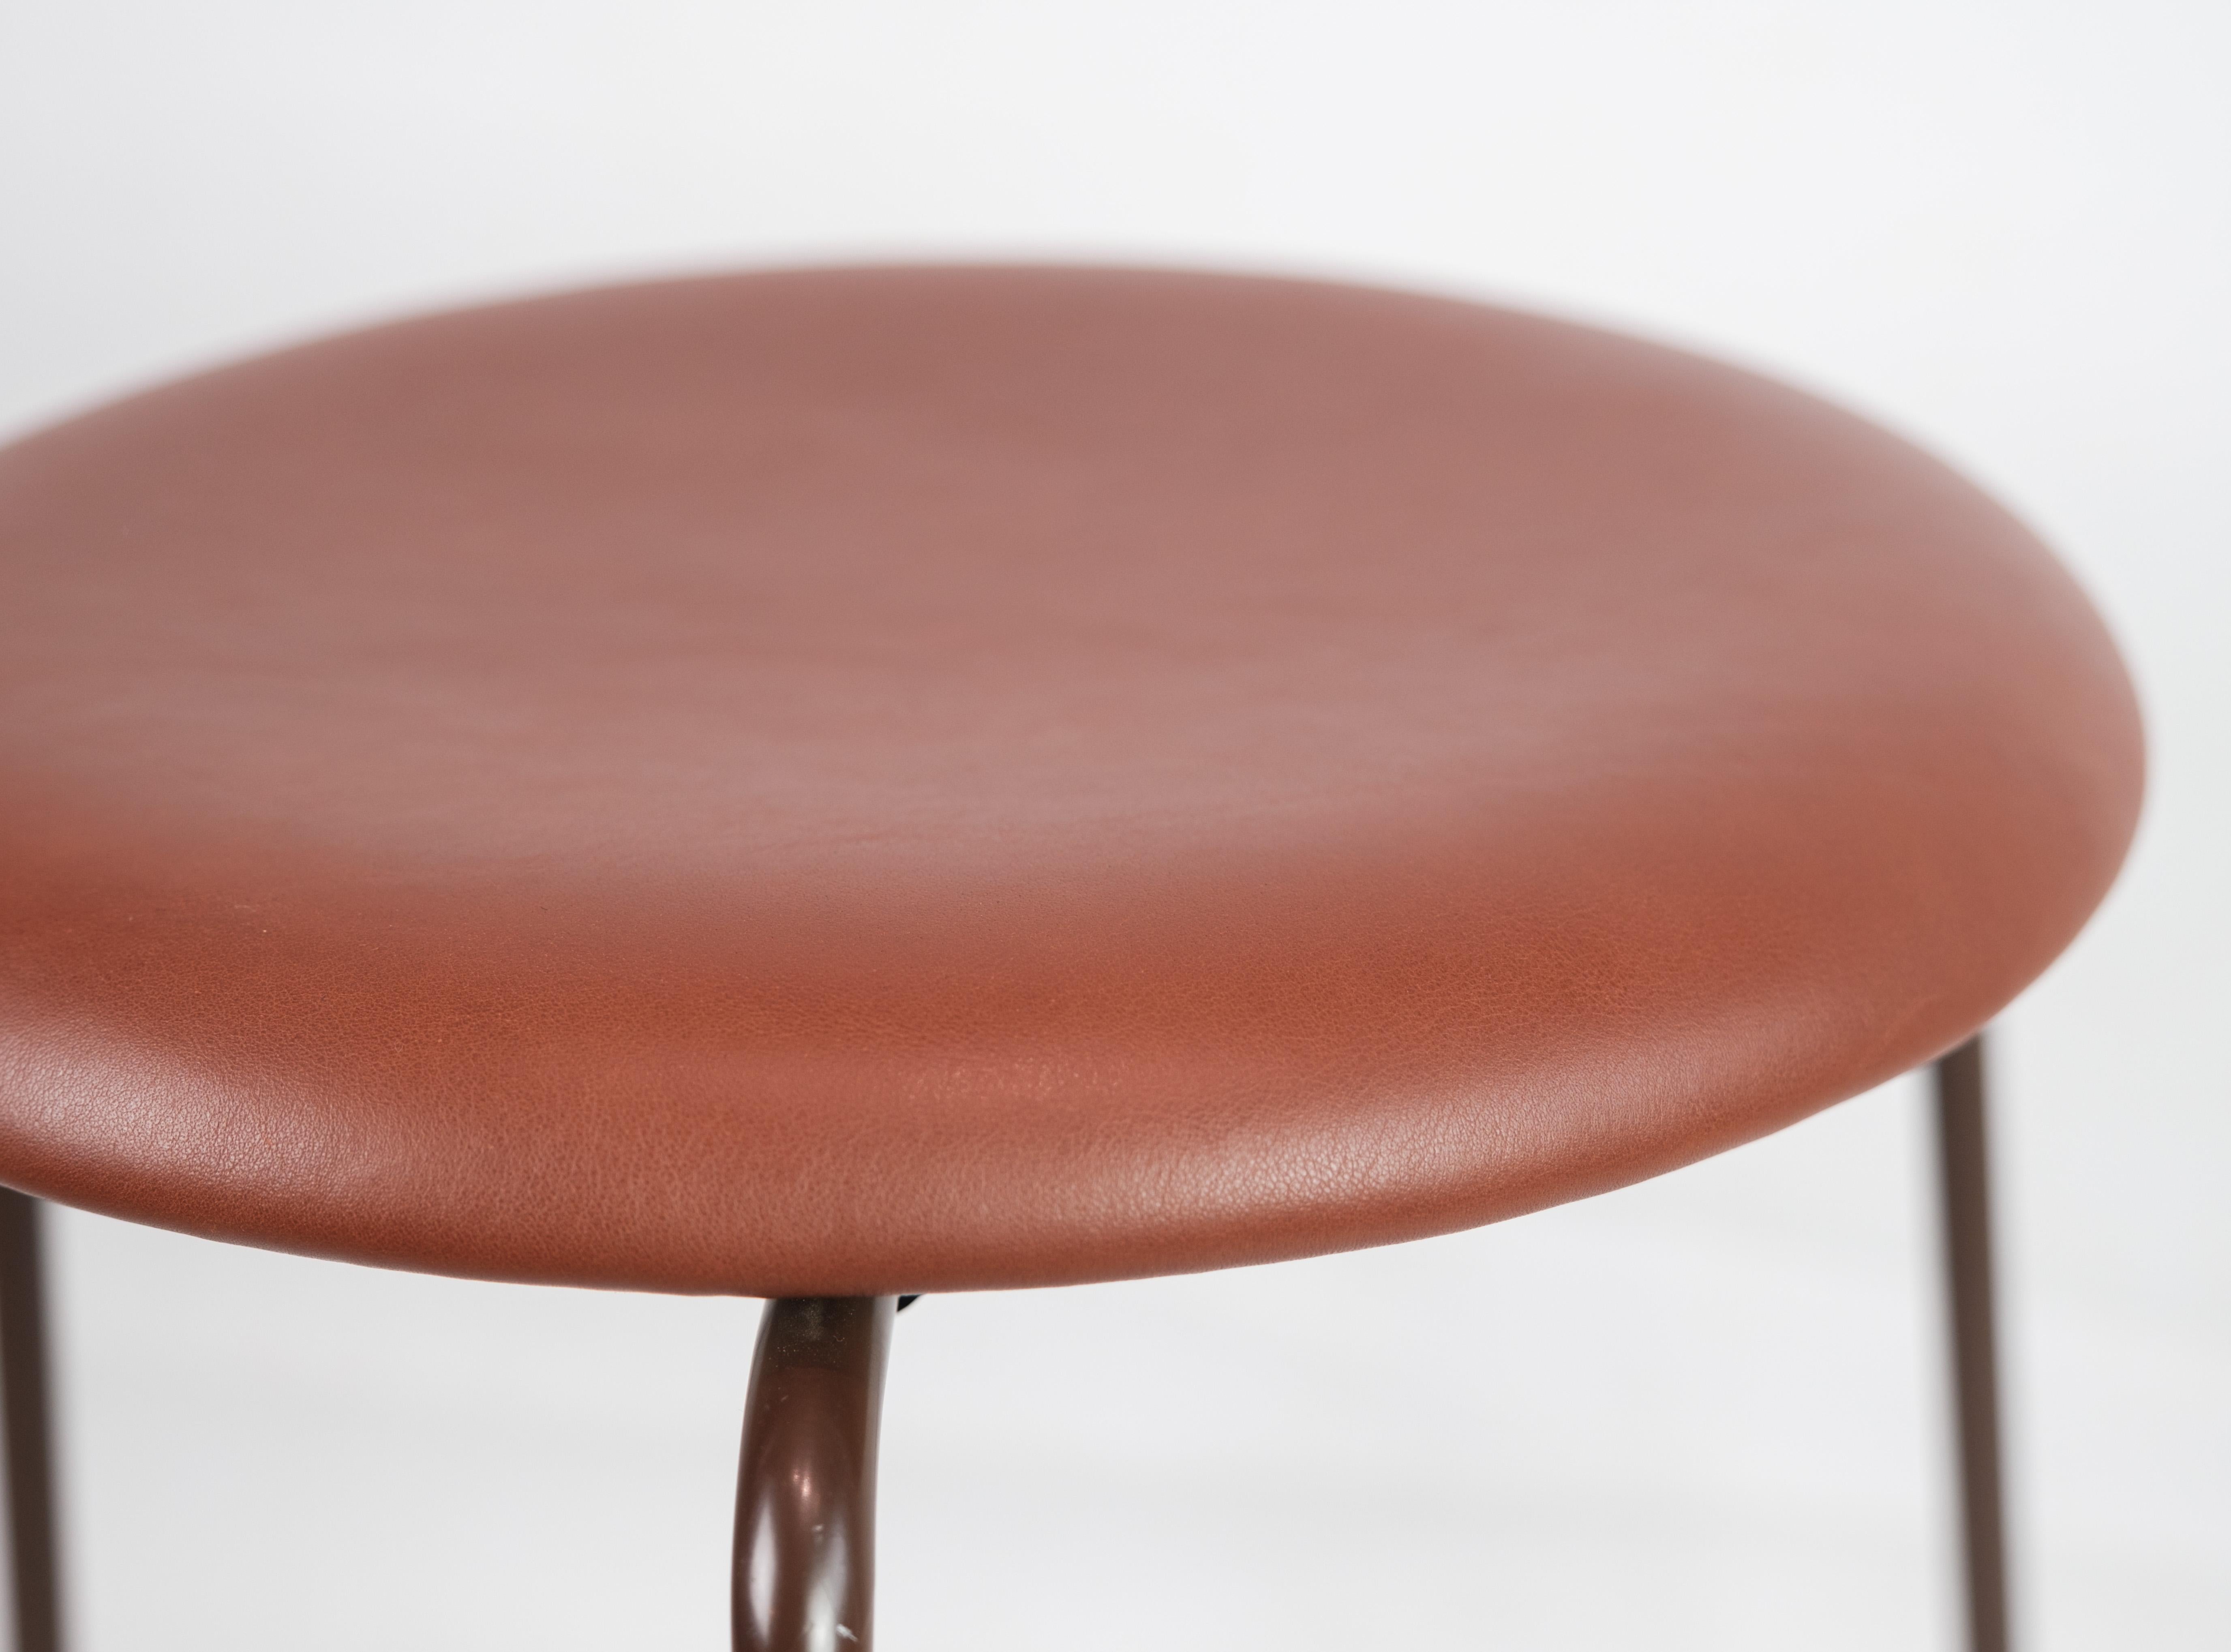 Unknown Arne Jacobsen Dot Stool / Stool with Leather and Brown Painted Frame from 1960s